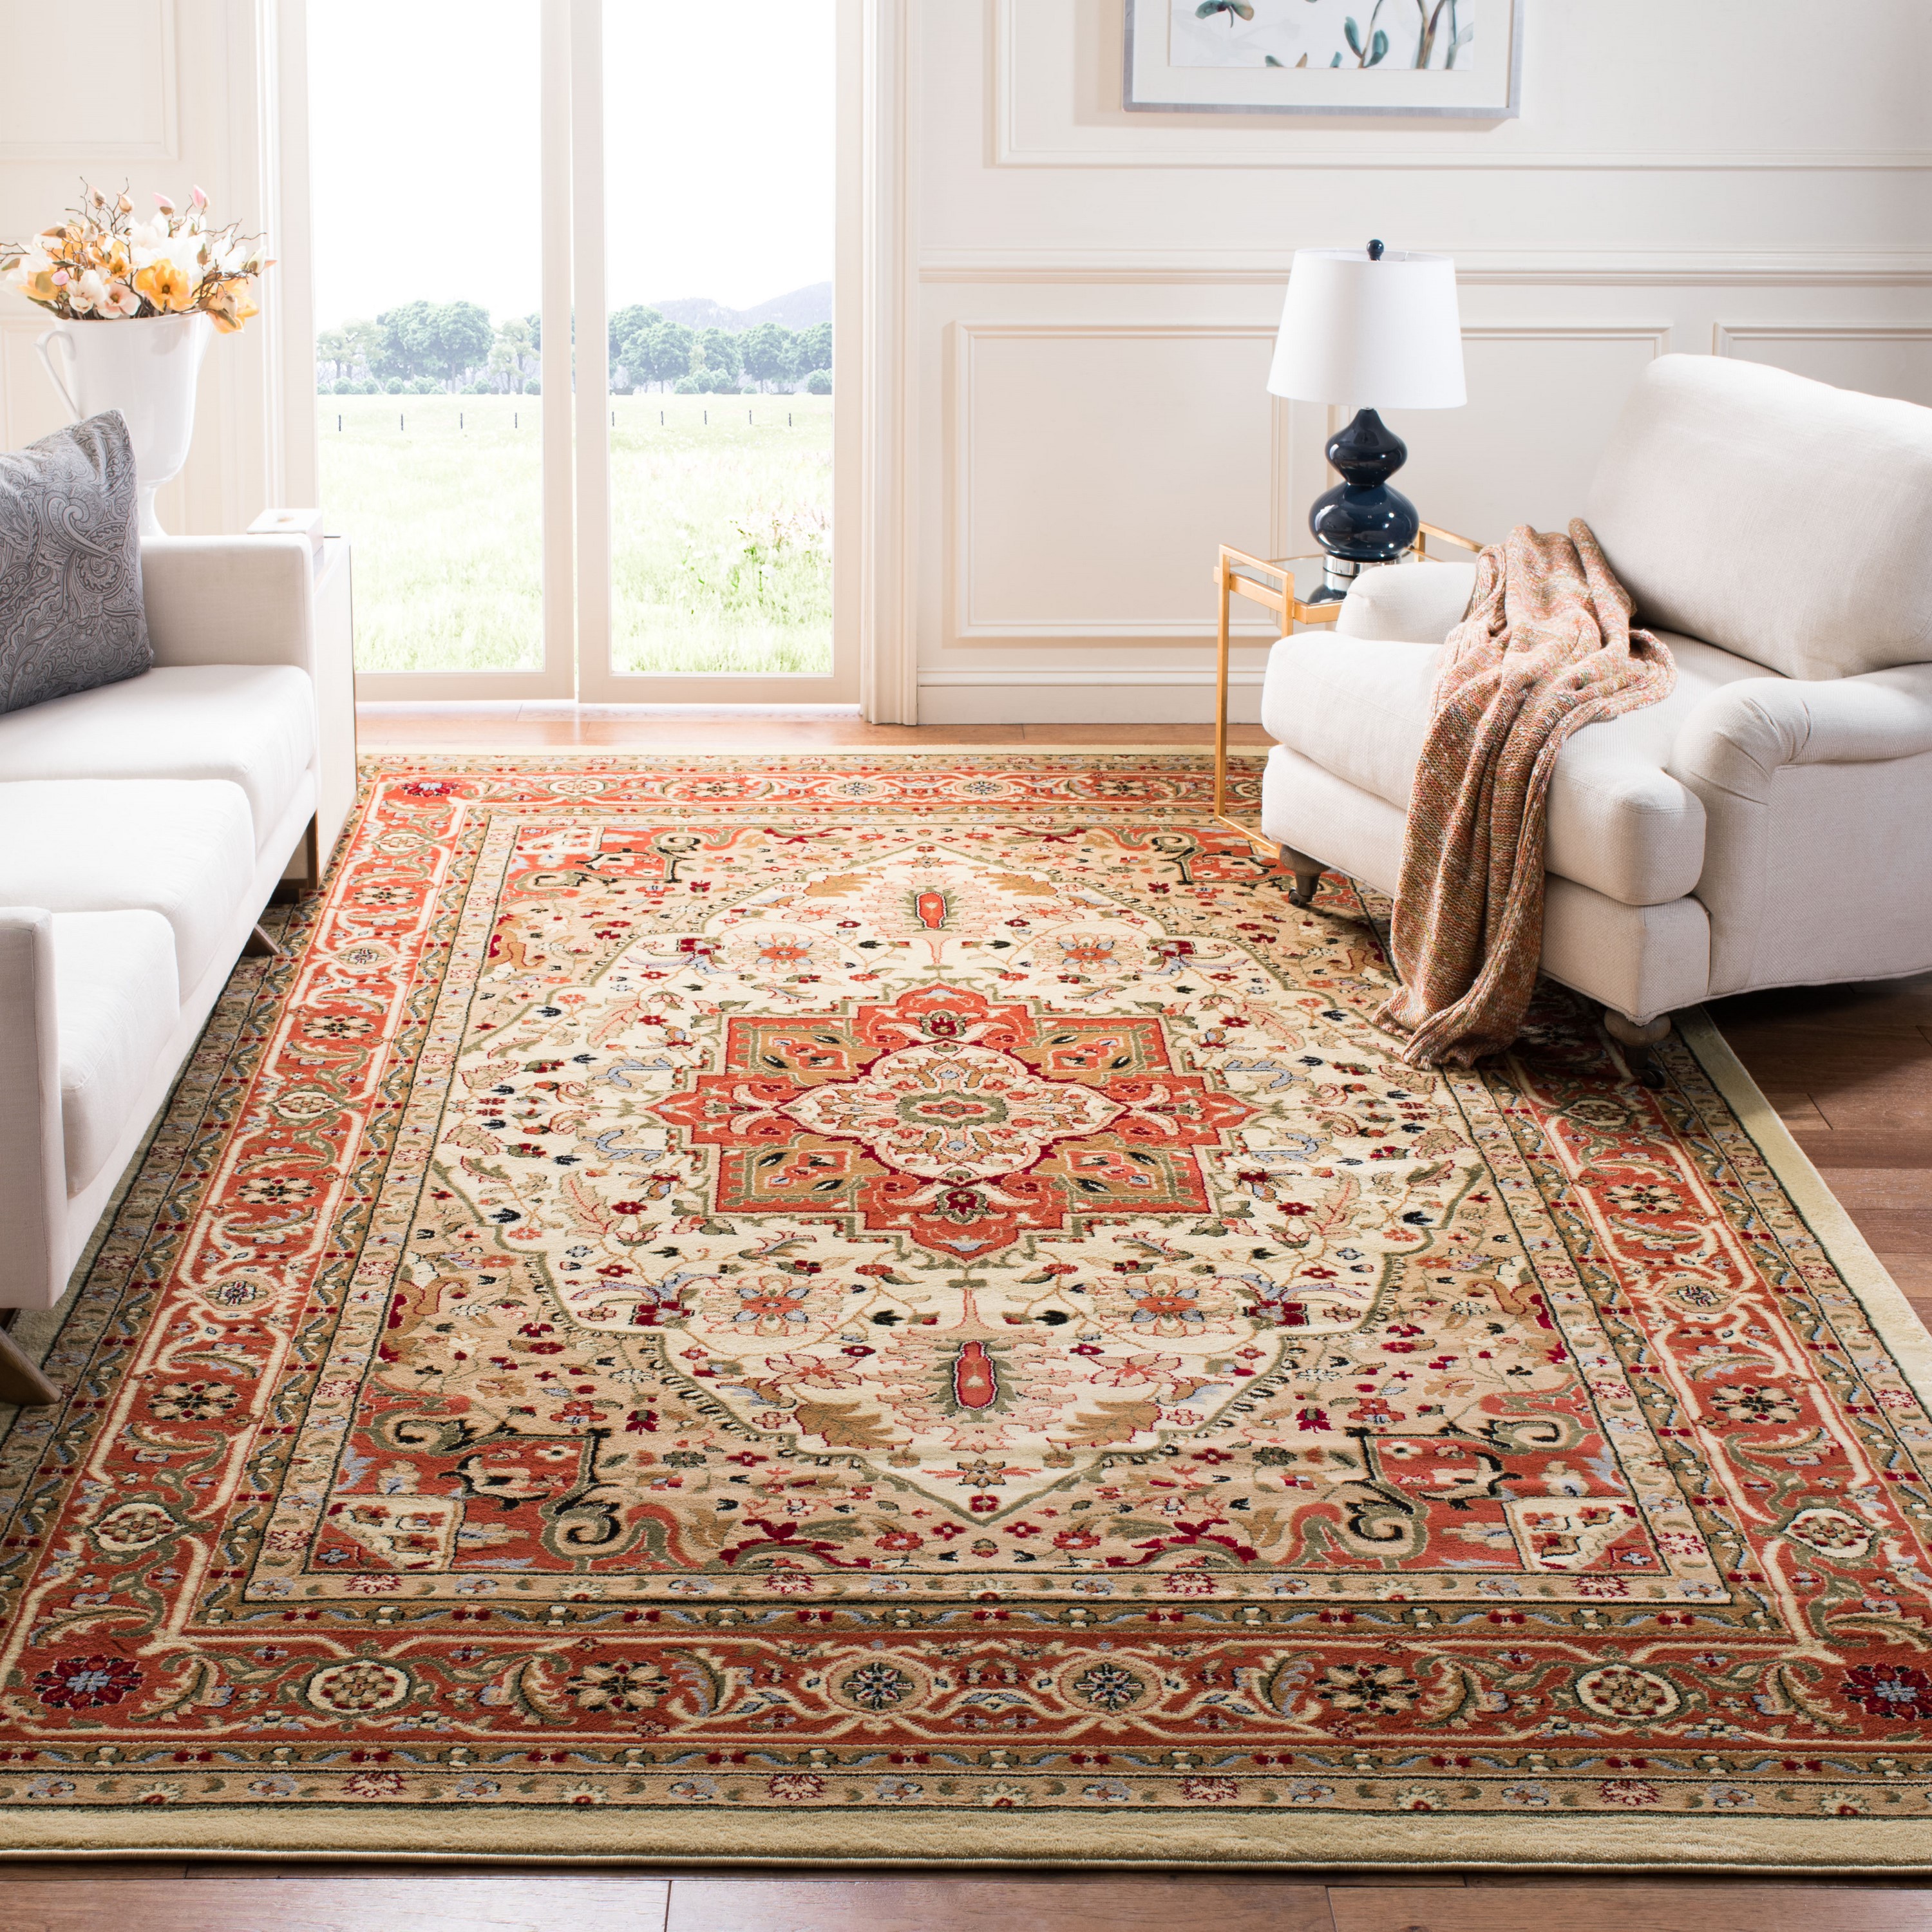 12x18 Area Rugs